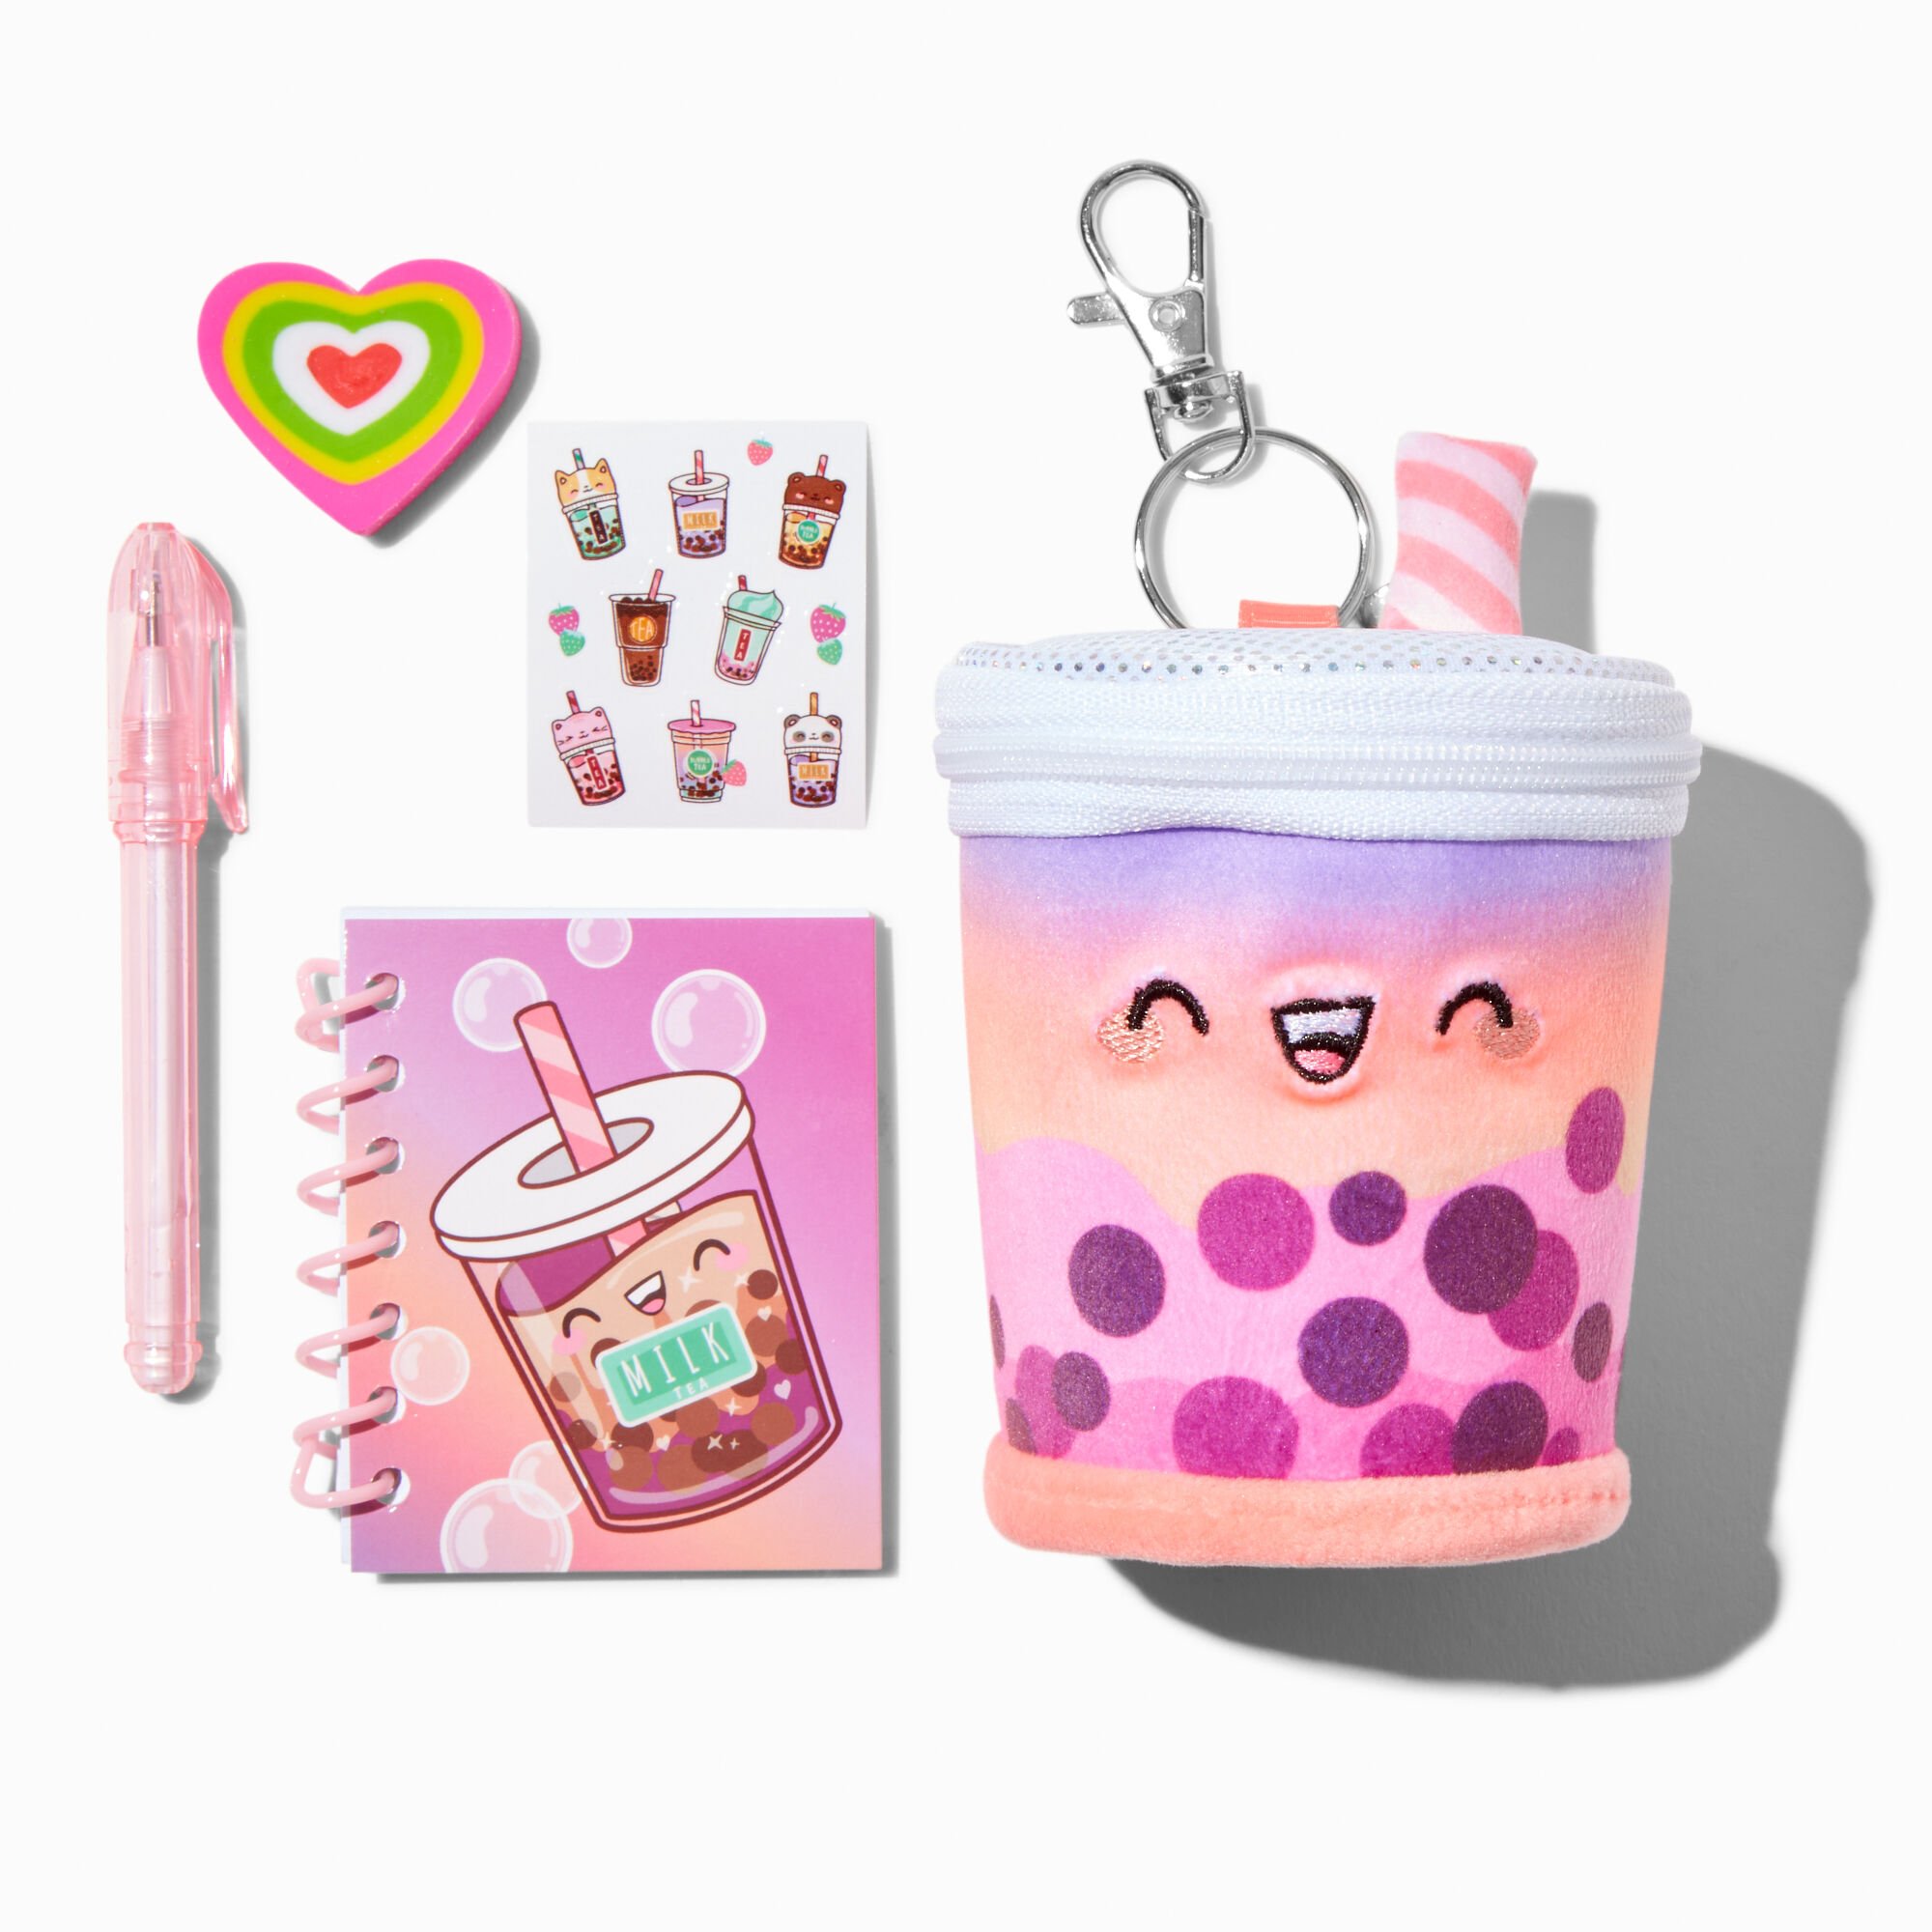 View Claires Boba 4 Stationery Set Pink information